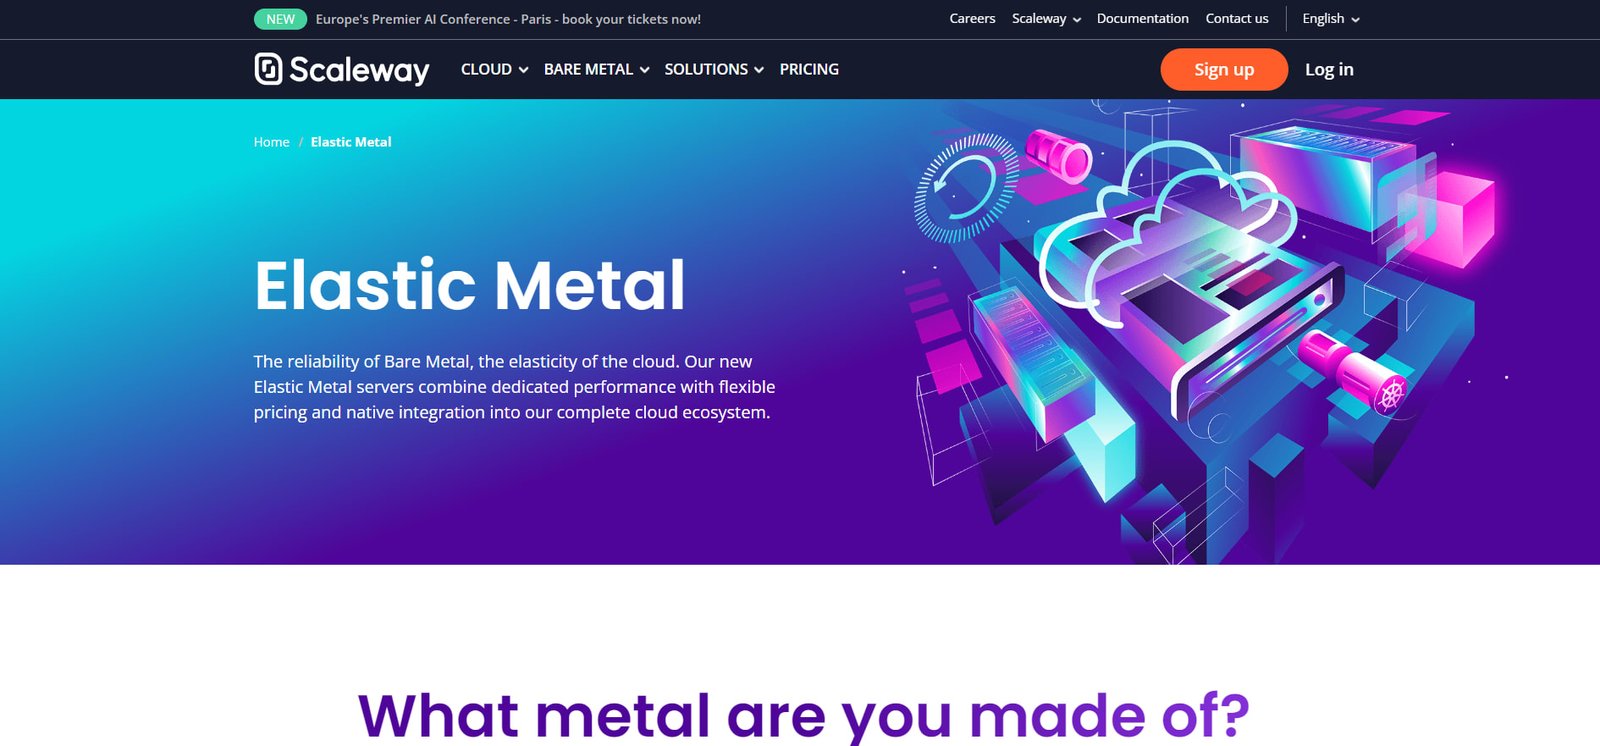 Scaleway’s “Elastic Metal” servers offer the benefits of bare metal and cloud.